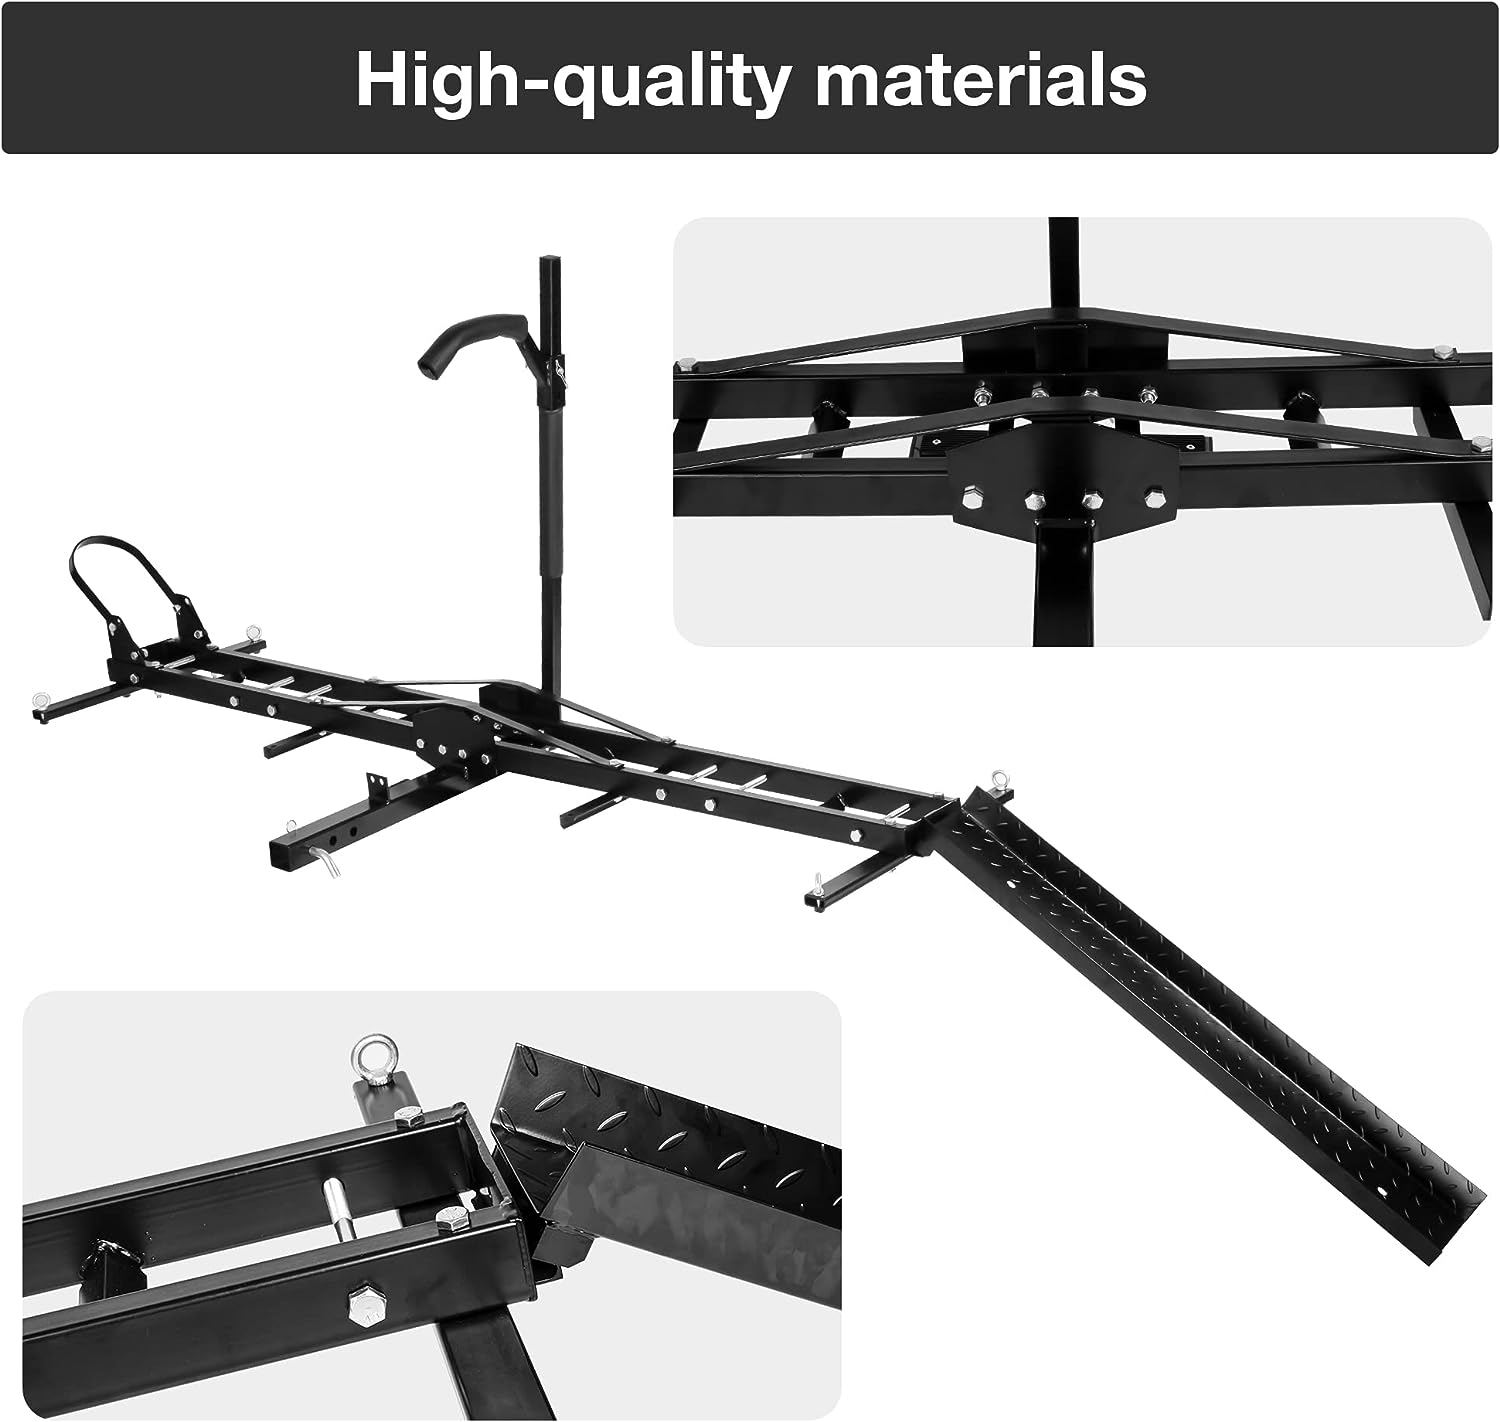 Hitch Mount Dirt Bike Carrier Rack Motorcycle Carrier with Loading Ramp and 2" Hitch Receiver